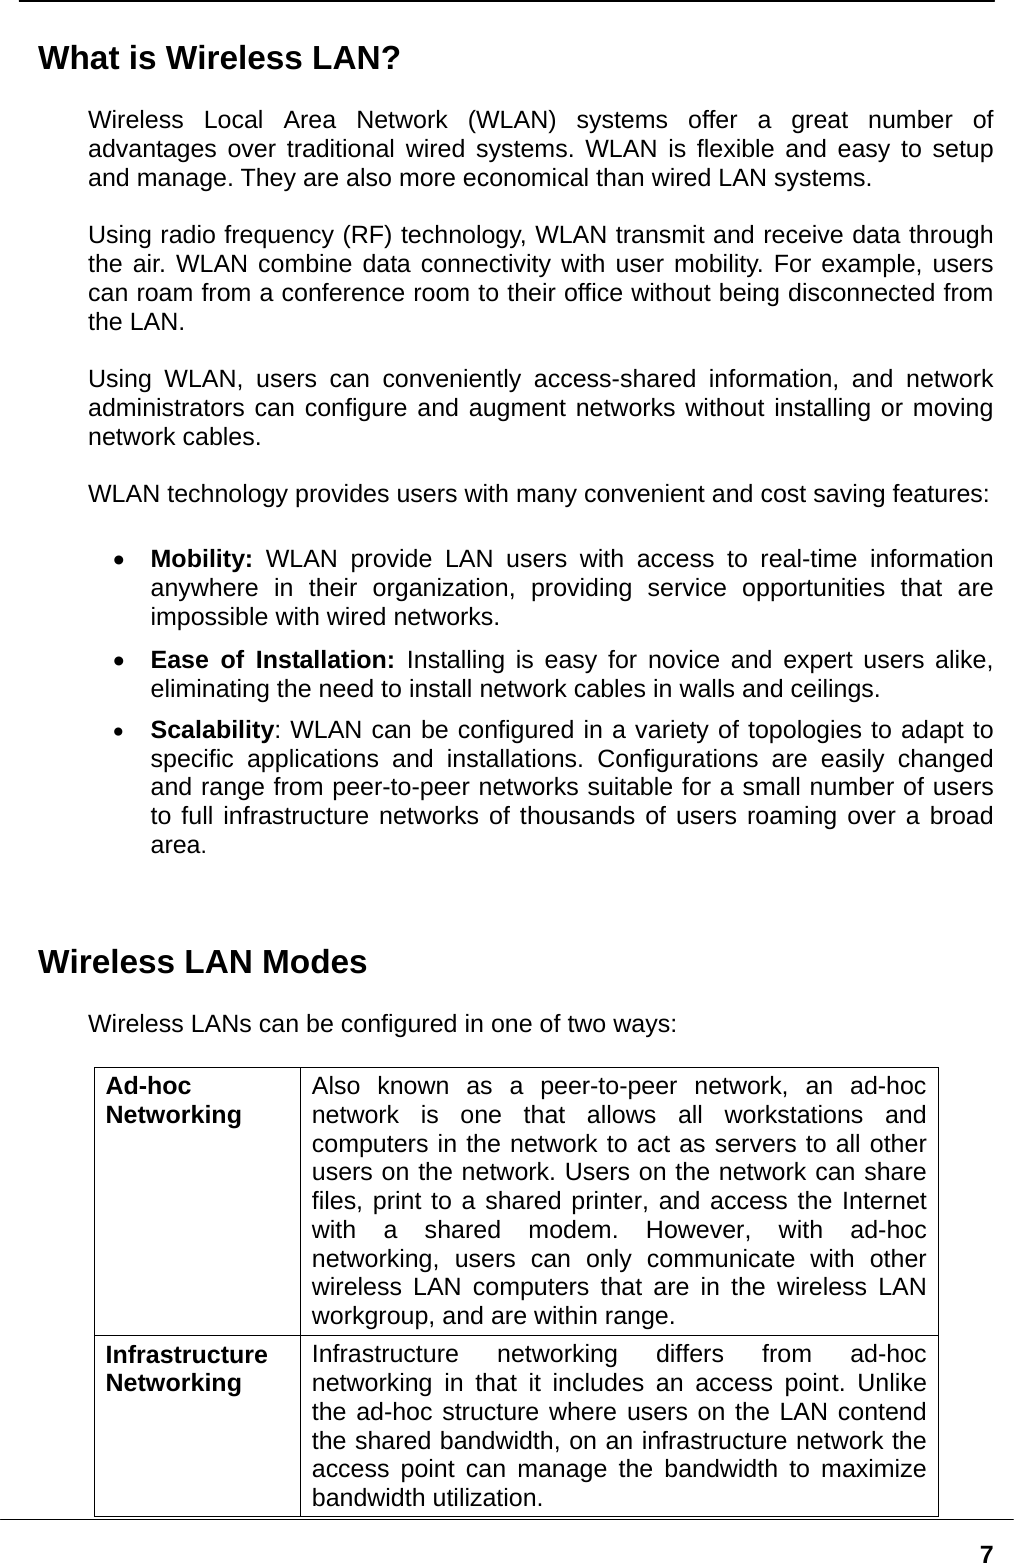   7What is Wireless LAN?  Wireless Local Area Network (WLAN) systems offer a great number of advantages over traditional wired systems. WLAN is flexible and easy to setup and manage. They are also more economical than wired LAN systems.  Using radio frequency (RF) technology, WLAN transmit and receive data through the air. WLAN combine data connectivity with user mobility. For example, users can roam from a conference room to their office without being disconnected from the LAN.  Using WLAN, users can conveniently access-shared information, and network administrators can configure and augment networks without installing or moving network cables.  WLAN technology provides users with many convenient and cost saving features:  •  Mobility: WLAN provide LAN users with access to real-time information anywhere in their organization, providing service opportunities that are impossible with wired networks. •  Ease of Installation: Installing is easy for novice and expert users alike, eliminating the need to install network cables in walls and ceilings.  •  Scalability: WLAN can be configured in a variety of topologies to adapt to specific applications and installations. Configurations are easily changed and range from peer-to-peer networks suitable for a small number of users to full infrastructure networks of thousands of users roaming over a broad area.   Wireless LAN Modes  Wireless LANs can be configured in one of two ways:  Ad-hoc  Networking  Also known as a peer-to-peer network, an ad-hoc network is one that allows all workstations and computers in the network to act as servers to all other users on the network. Users on the network can share files, print to a shared printer, and access the Internet with a shared modem. However, with ad-hoc networking, users can only communicate with other wireless LAN computers that are in the wireless LAN workgroup, and are within range. Infrastructure Networking  Infrastructure networking differs from ad-hoc networking in that it includes an access point. Unlike the ad-hoc structure where users on the LAN contend the shared bandwidth, on an infrastructure network the access point can manage the bandwidth to maximize bandwidth utilization.   